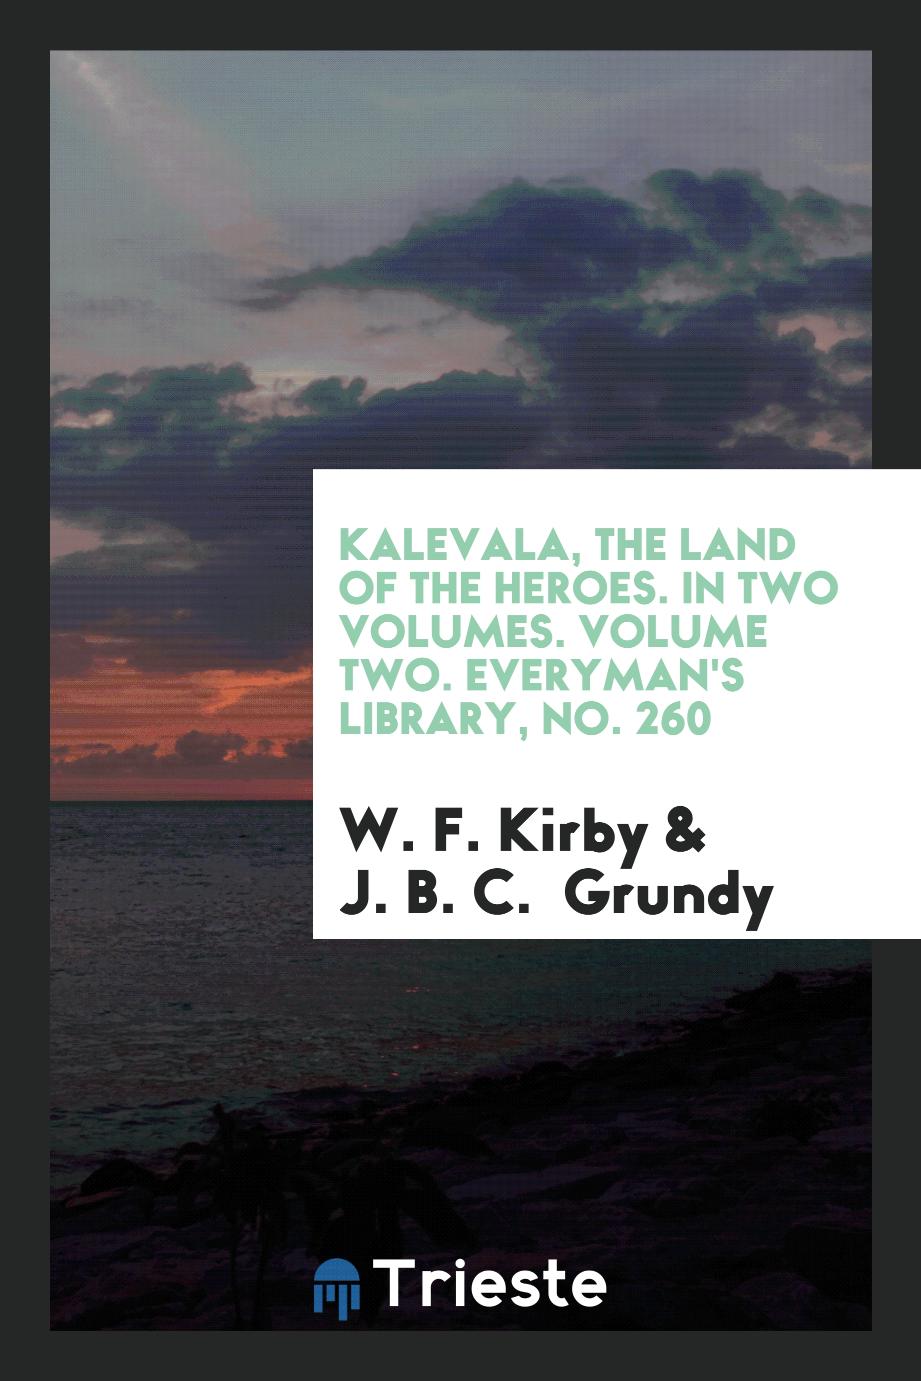 Kalevala, the Land of the Heroes. In Two Volumes. Volume Two. Everyman's Library, No. 260